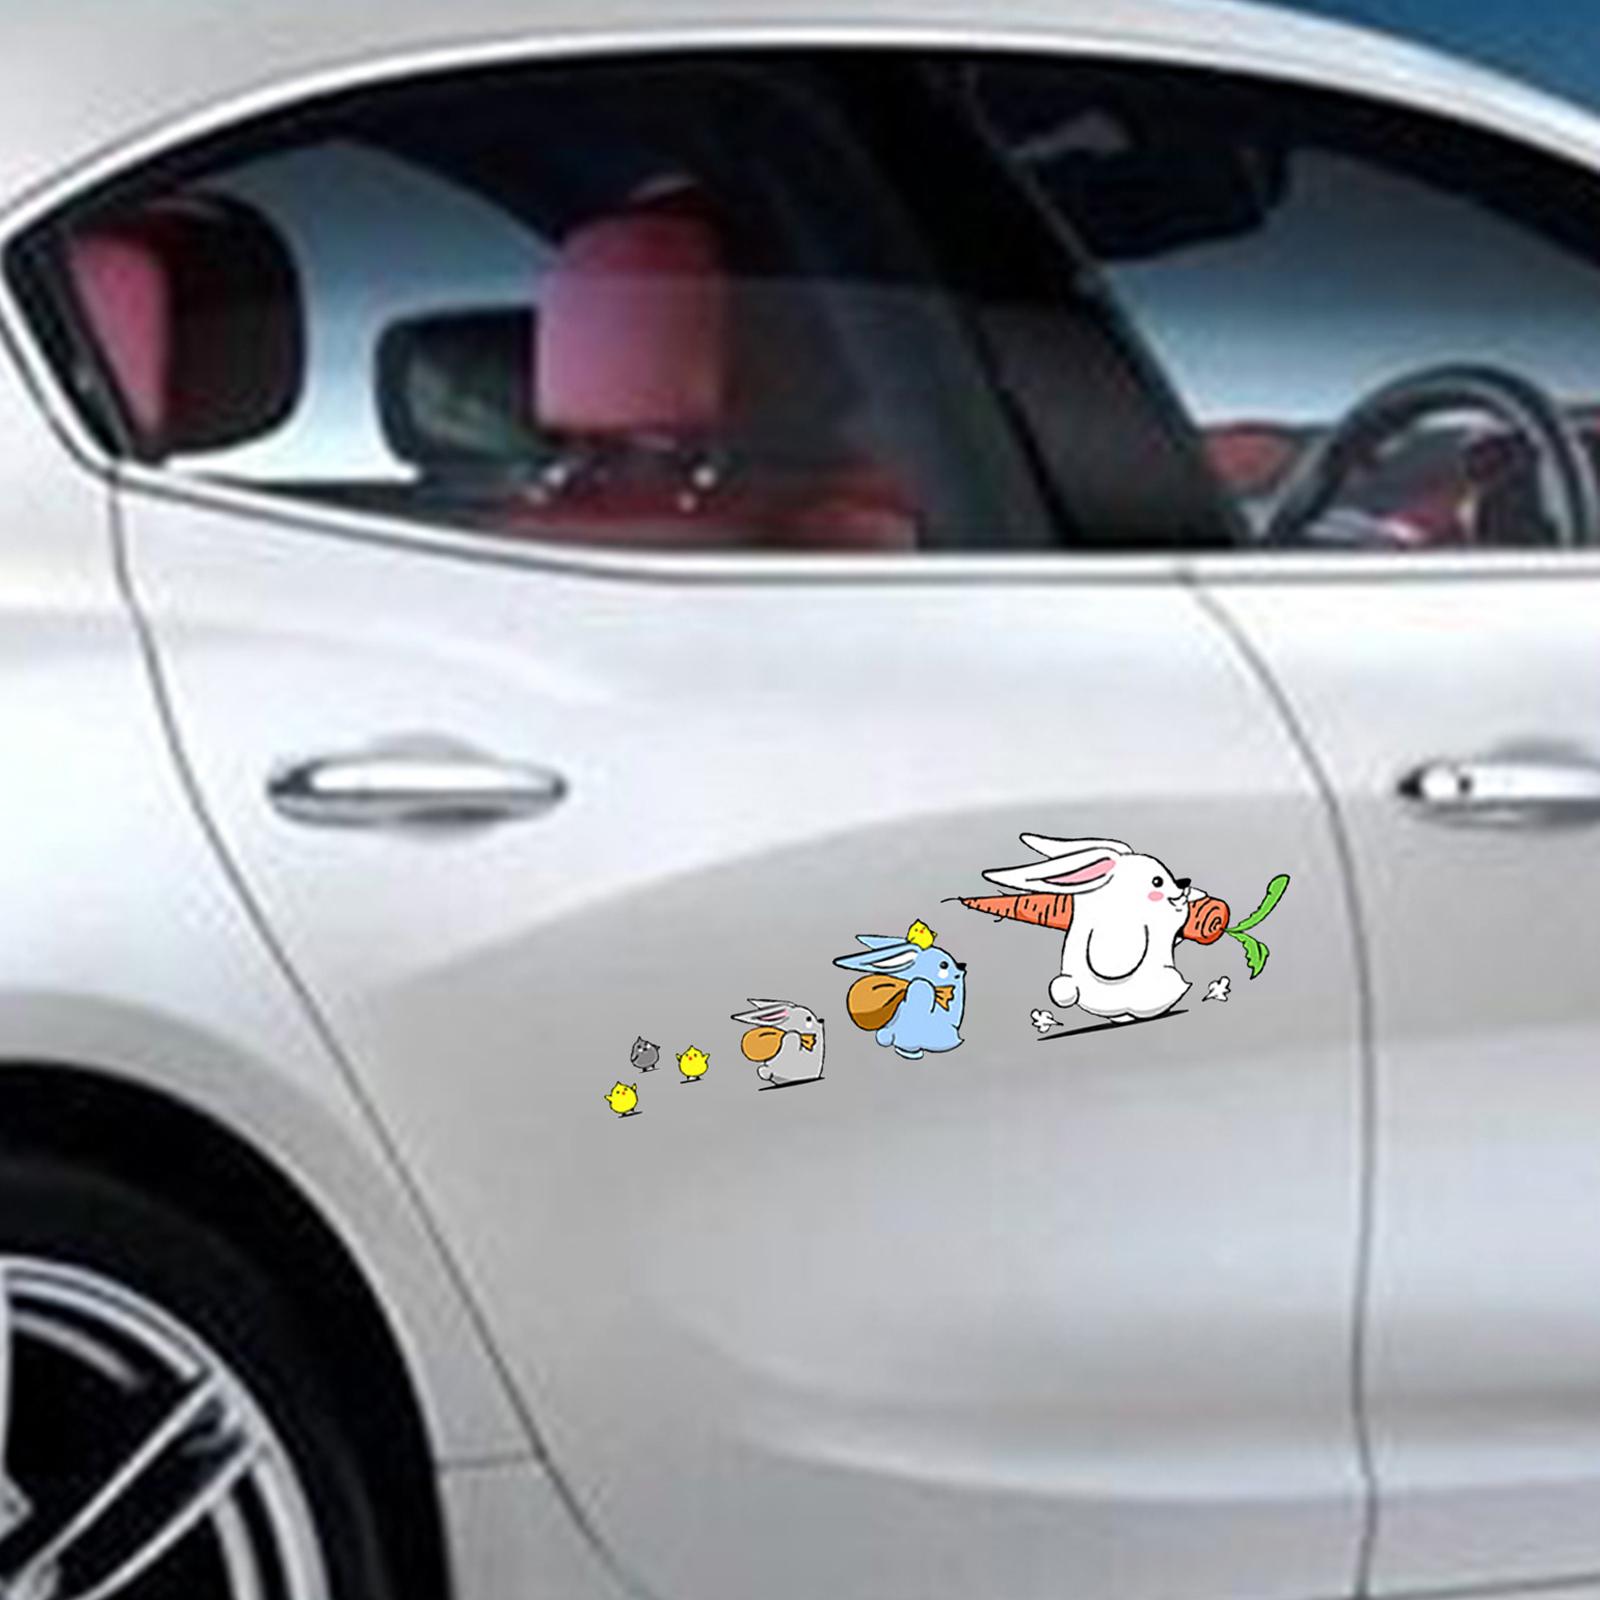 Bunny Car Stickers Car Window Decals Graphic for Cars Windows Vehicles Right S 